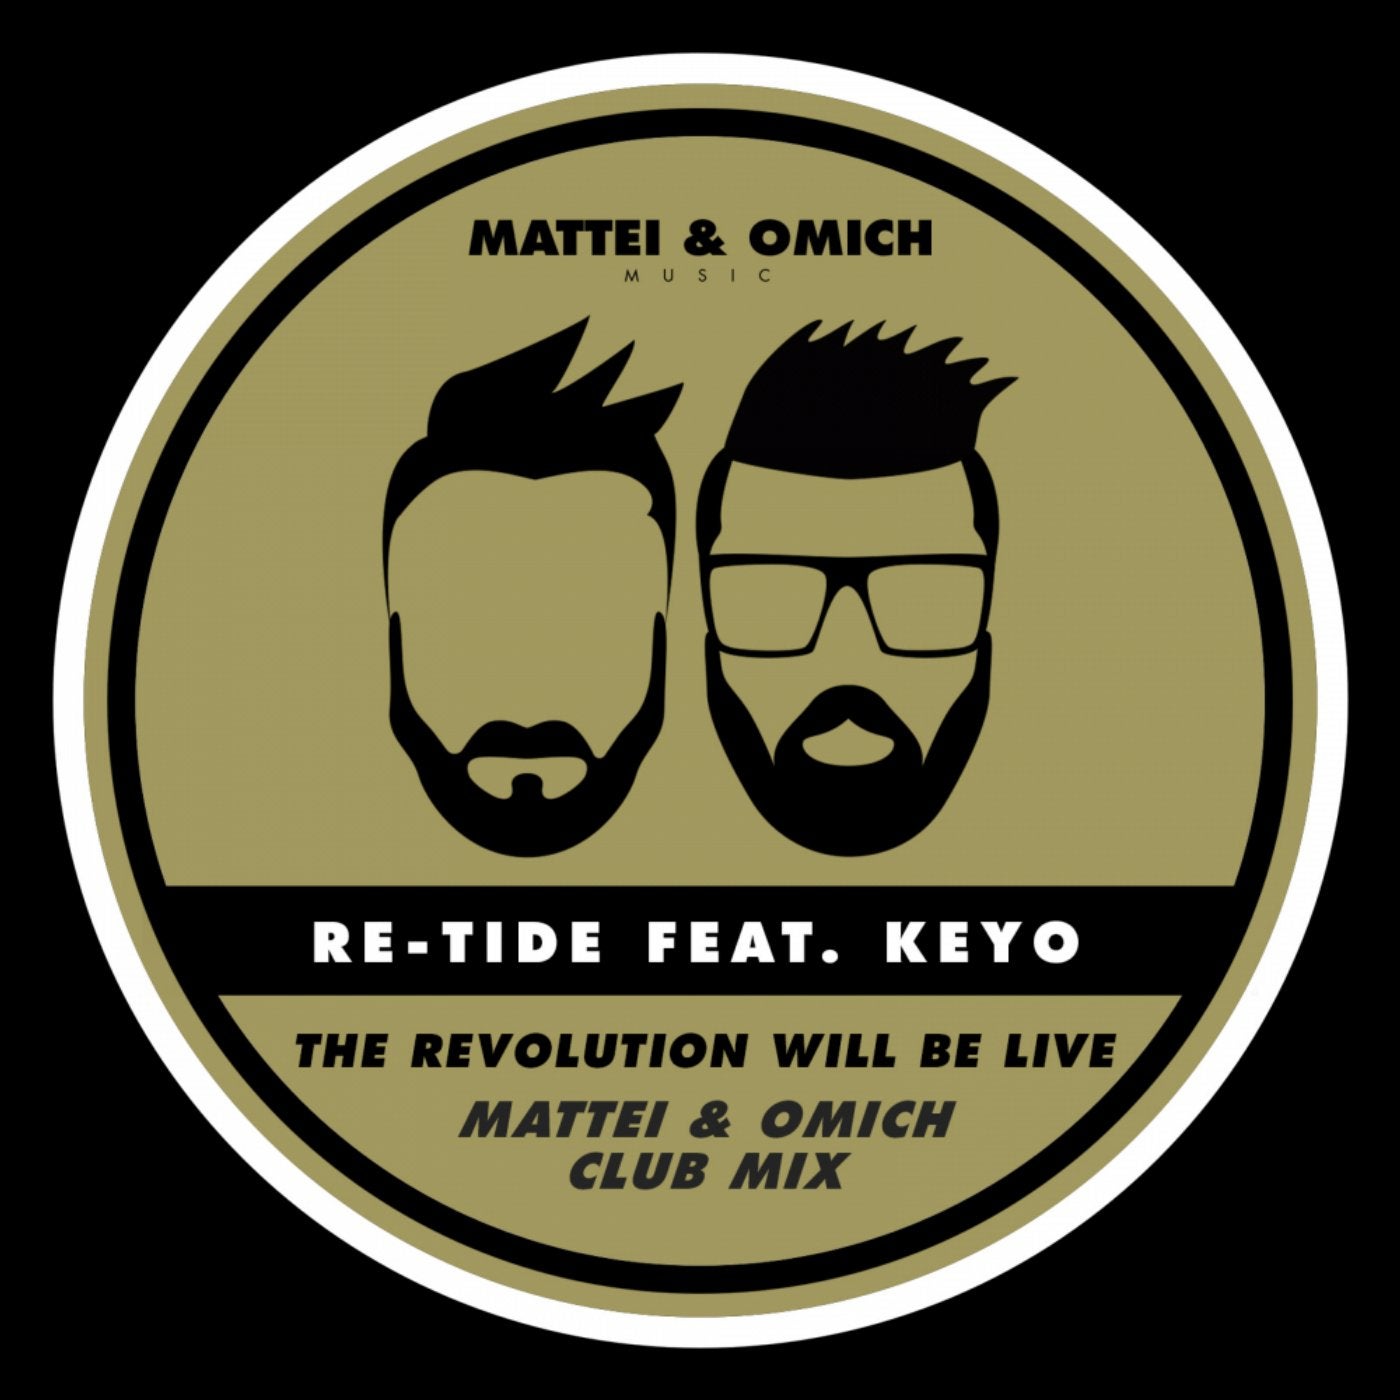 The Revolution Will Be Live (Mattei & Omich Remix)